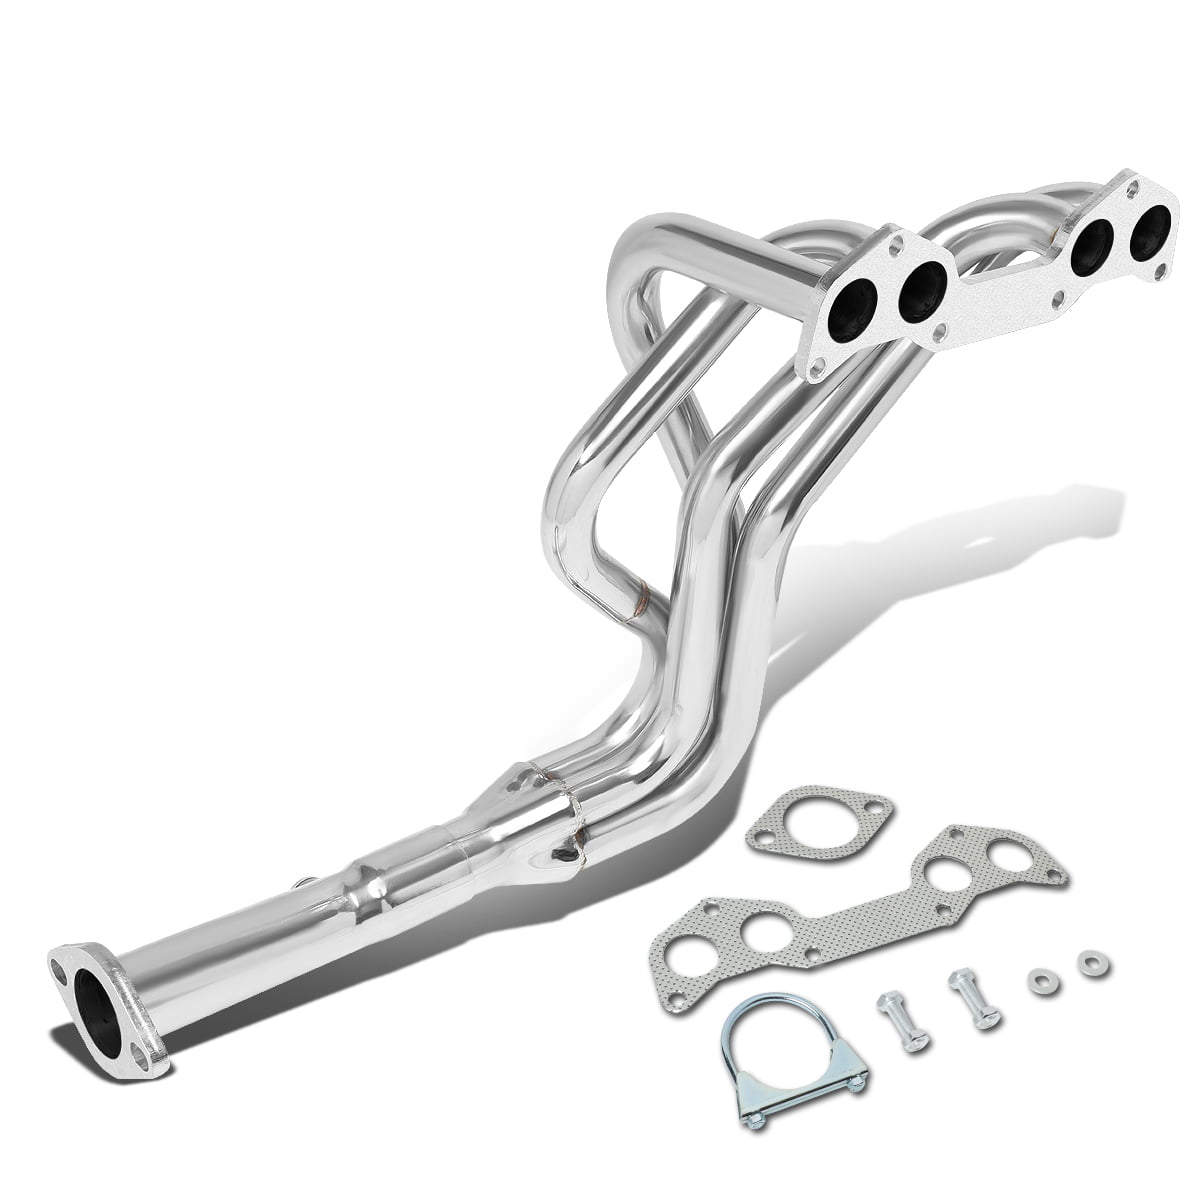 Replacement for Chevy Tahoe/GMC Yukon 4.8L 5.3L 6.0L V8 TRI-Y Long Tube Exhaust Header Manifold